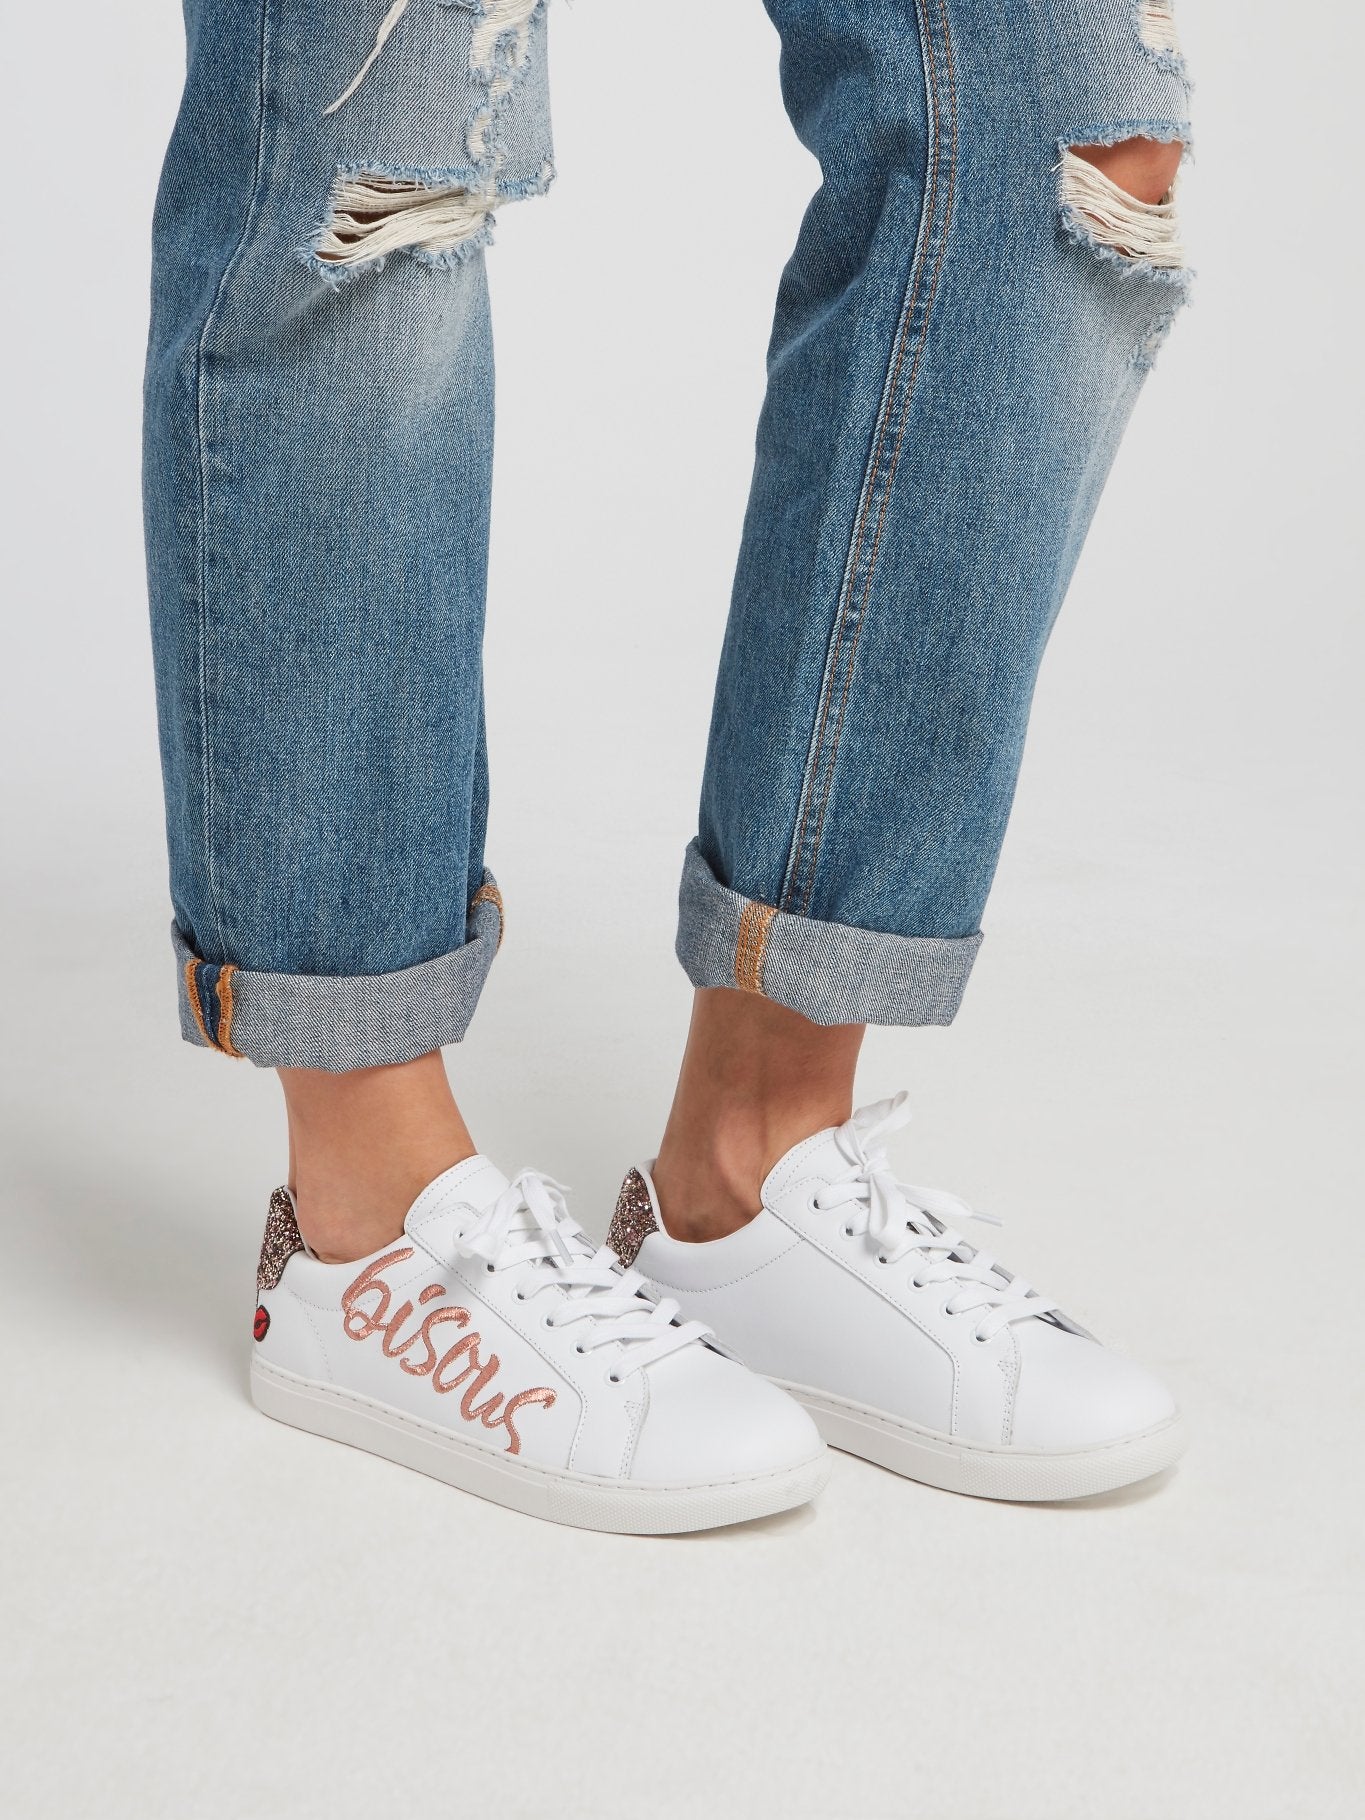 Satire politik værksted Simone Bisous Lace Up Sneakers – Maison-B-More Global Store